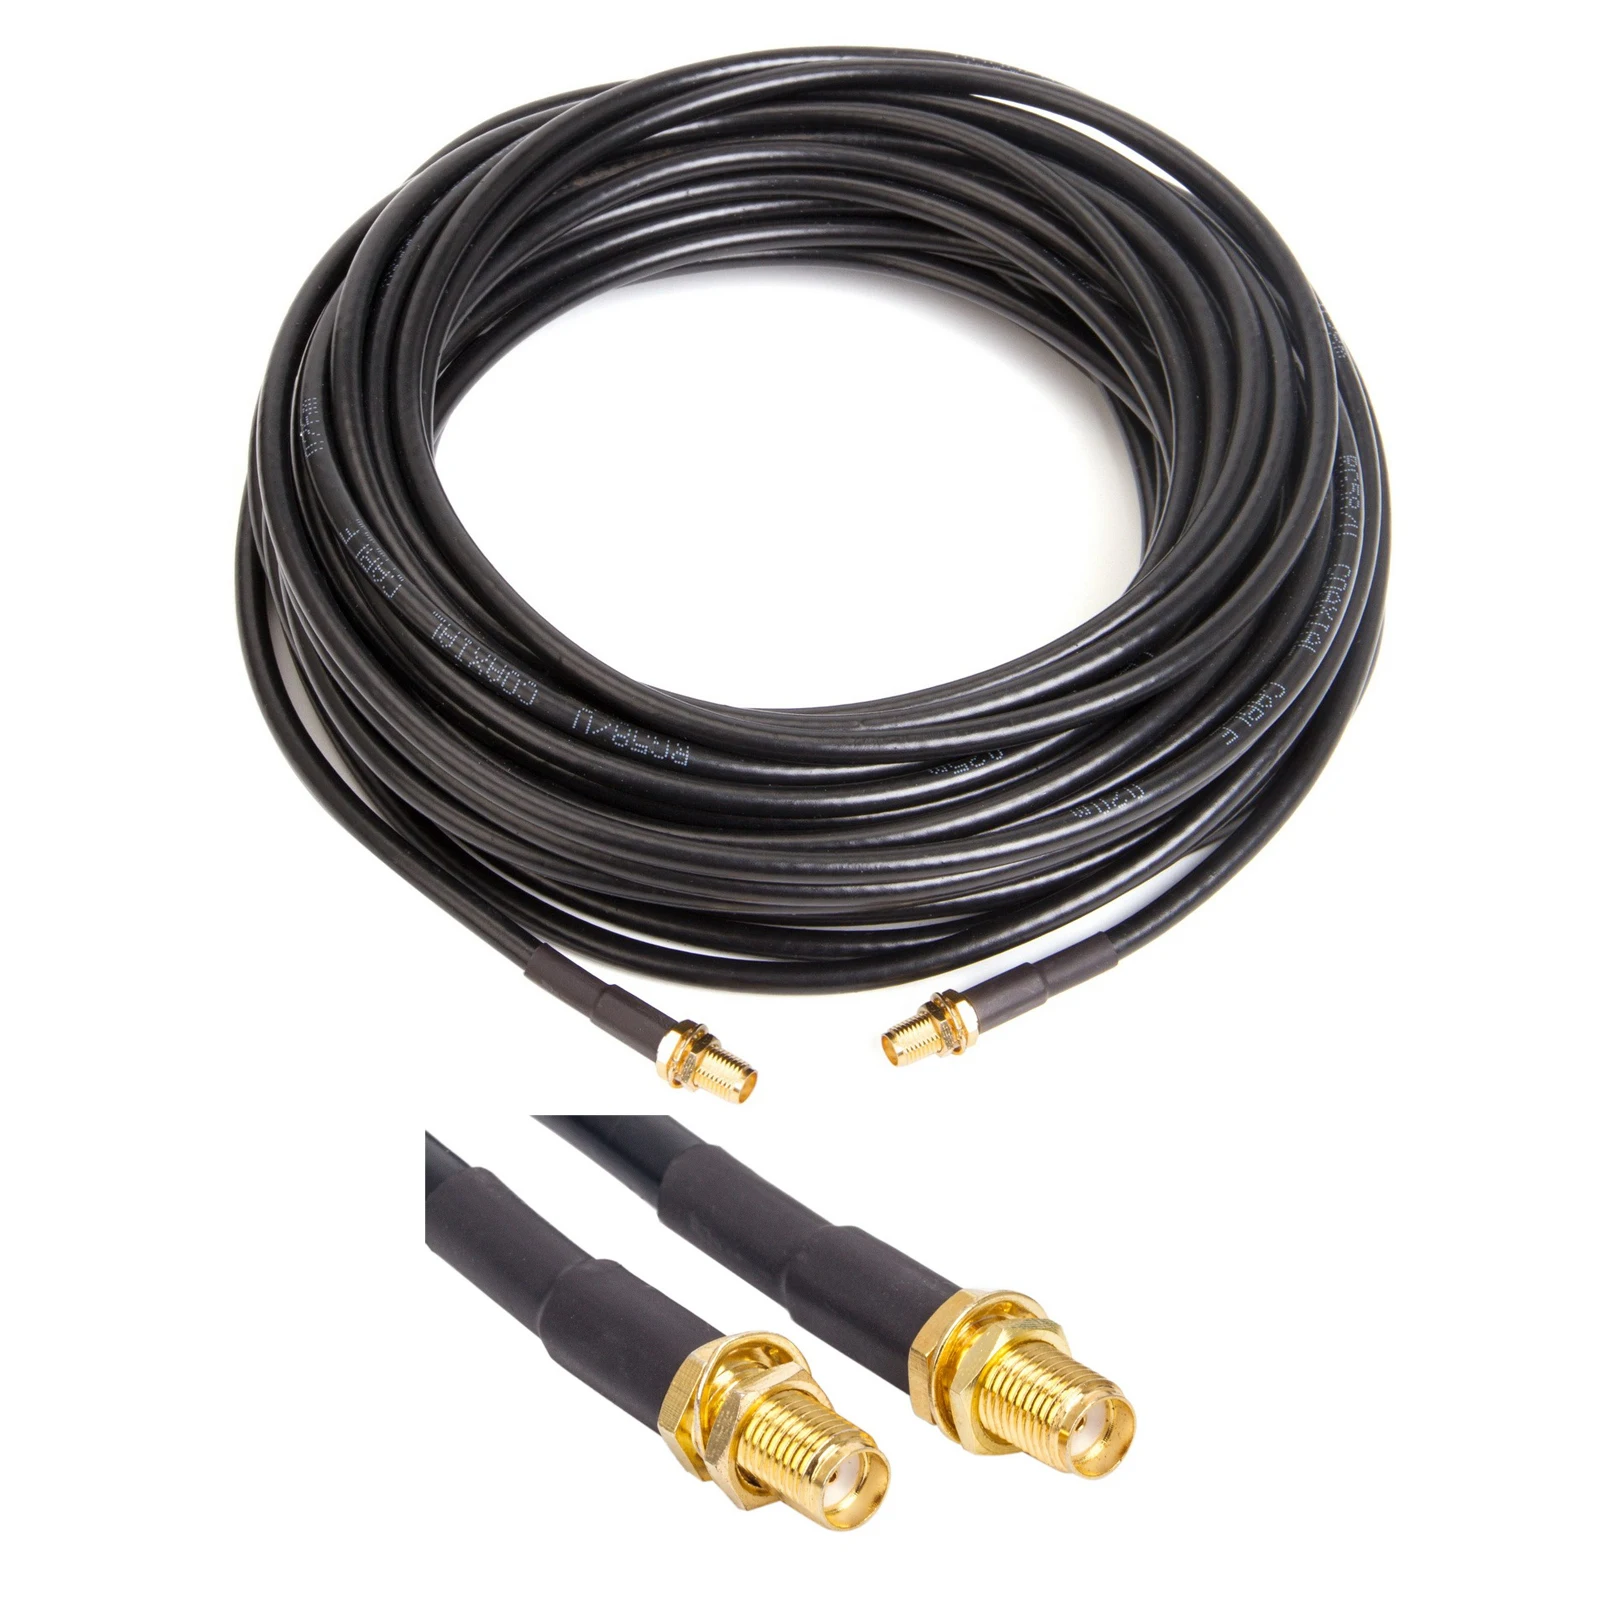 5M feeder SMA female to SMA female Extension Cable for Coax Coaxial WiFi Network Card Router Antenna RF Connector RG174 Cable 1750008799 01 advantech wifi coaxial cable 150 mm advantech sma f r bh mfh4 113 blk